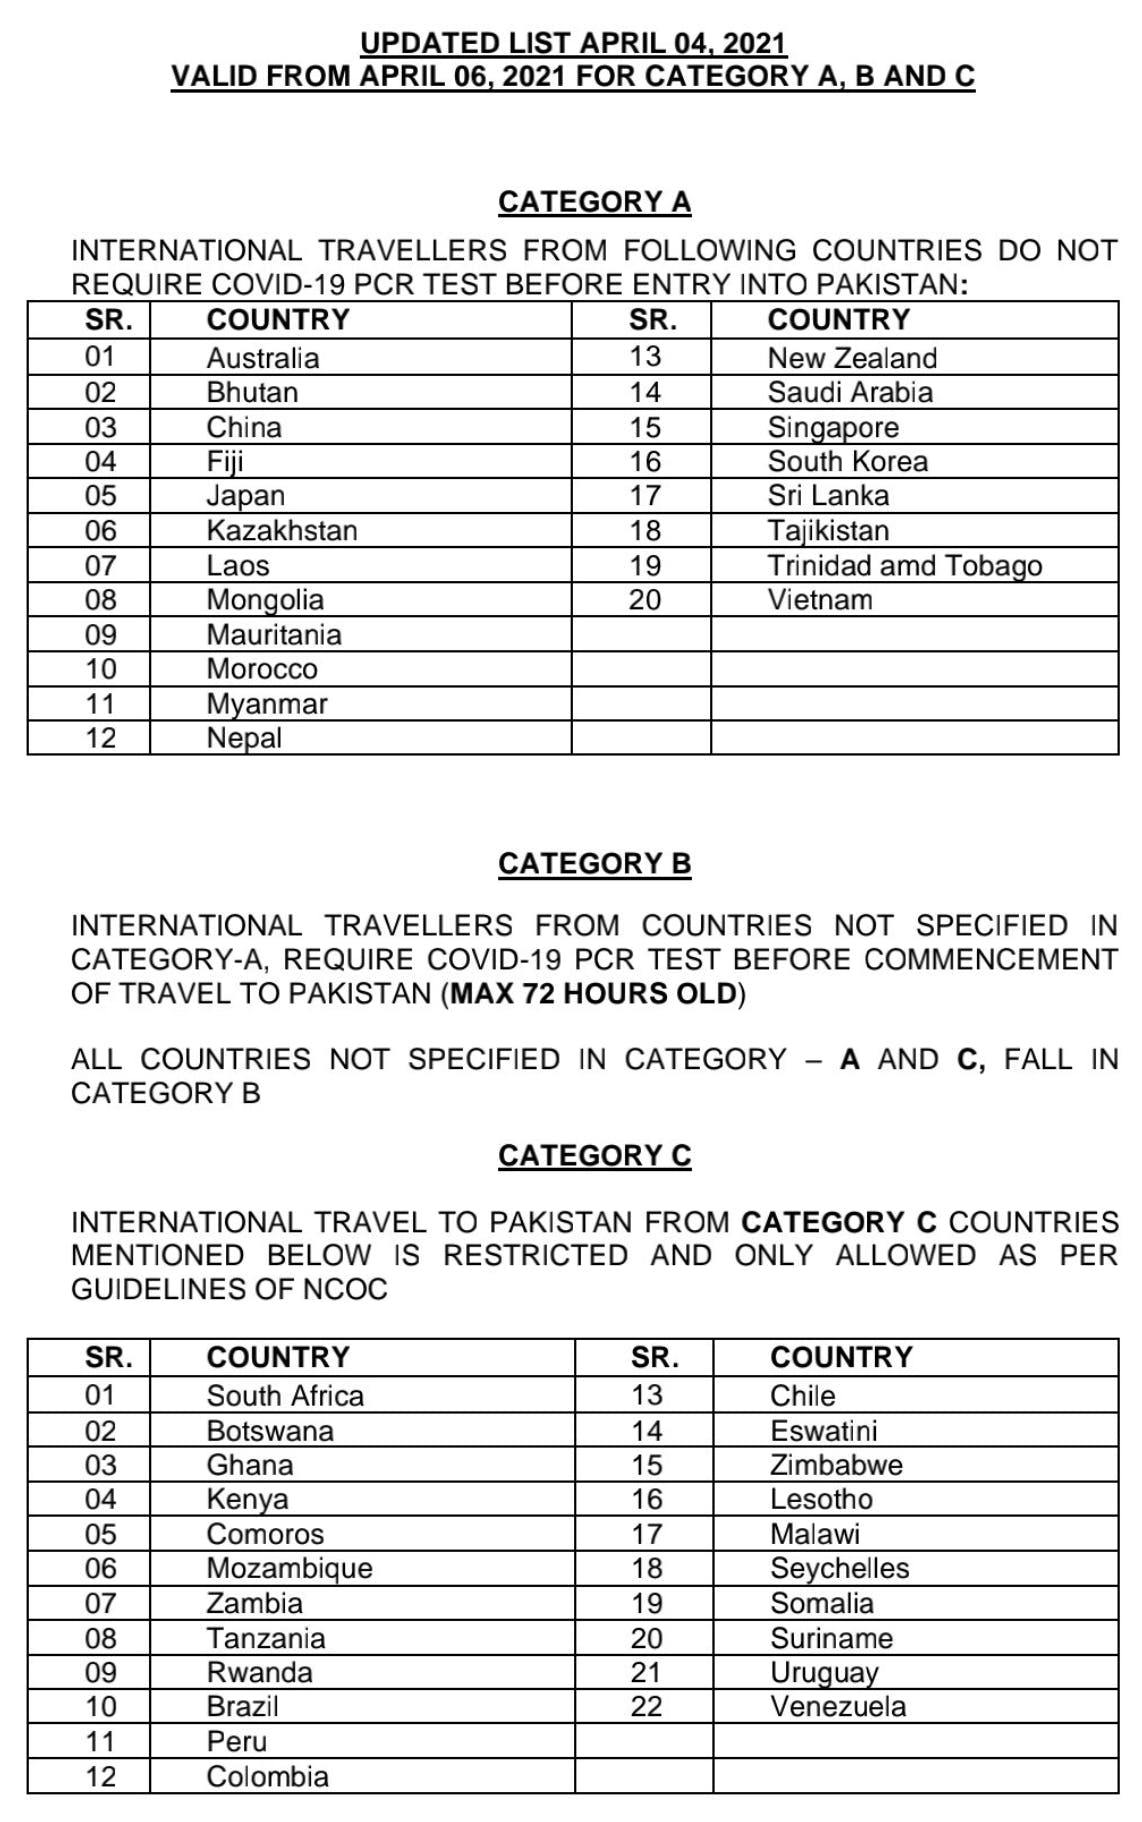 If you are travelling from these 20 Category A countries, you do not need a Covid-19 PCR test. Everyone else does.